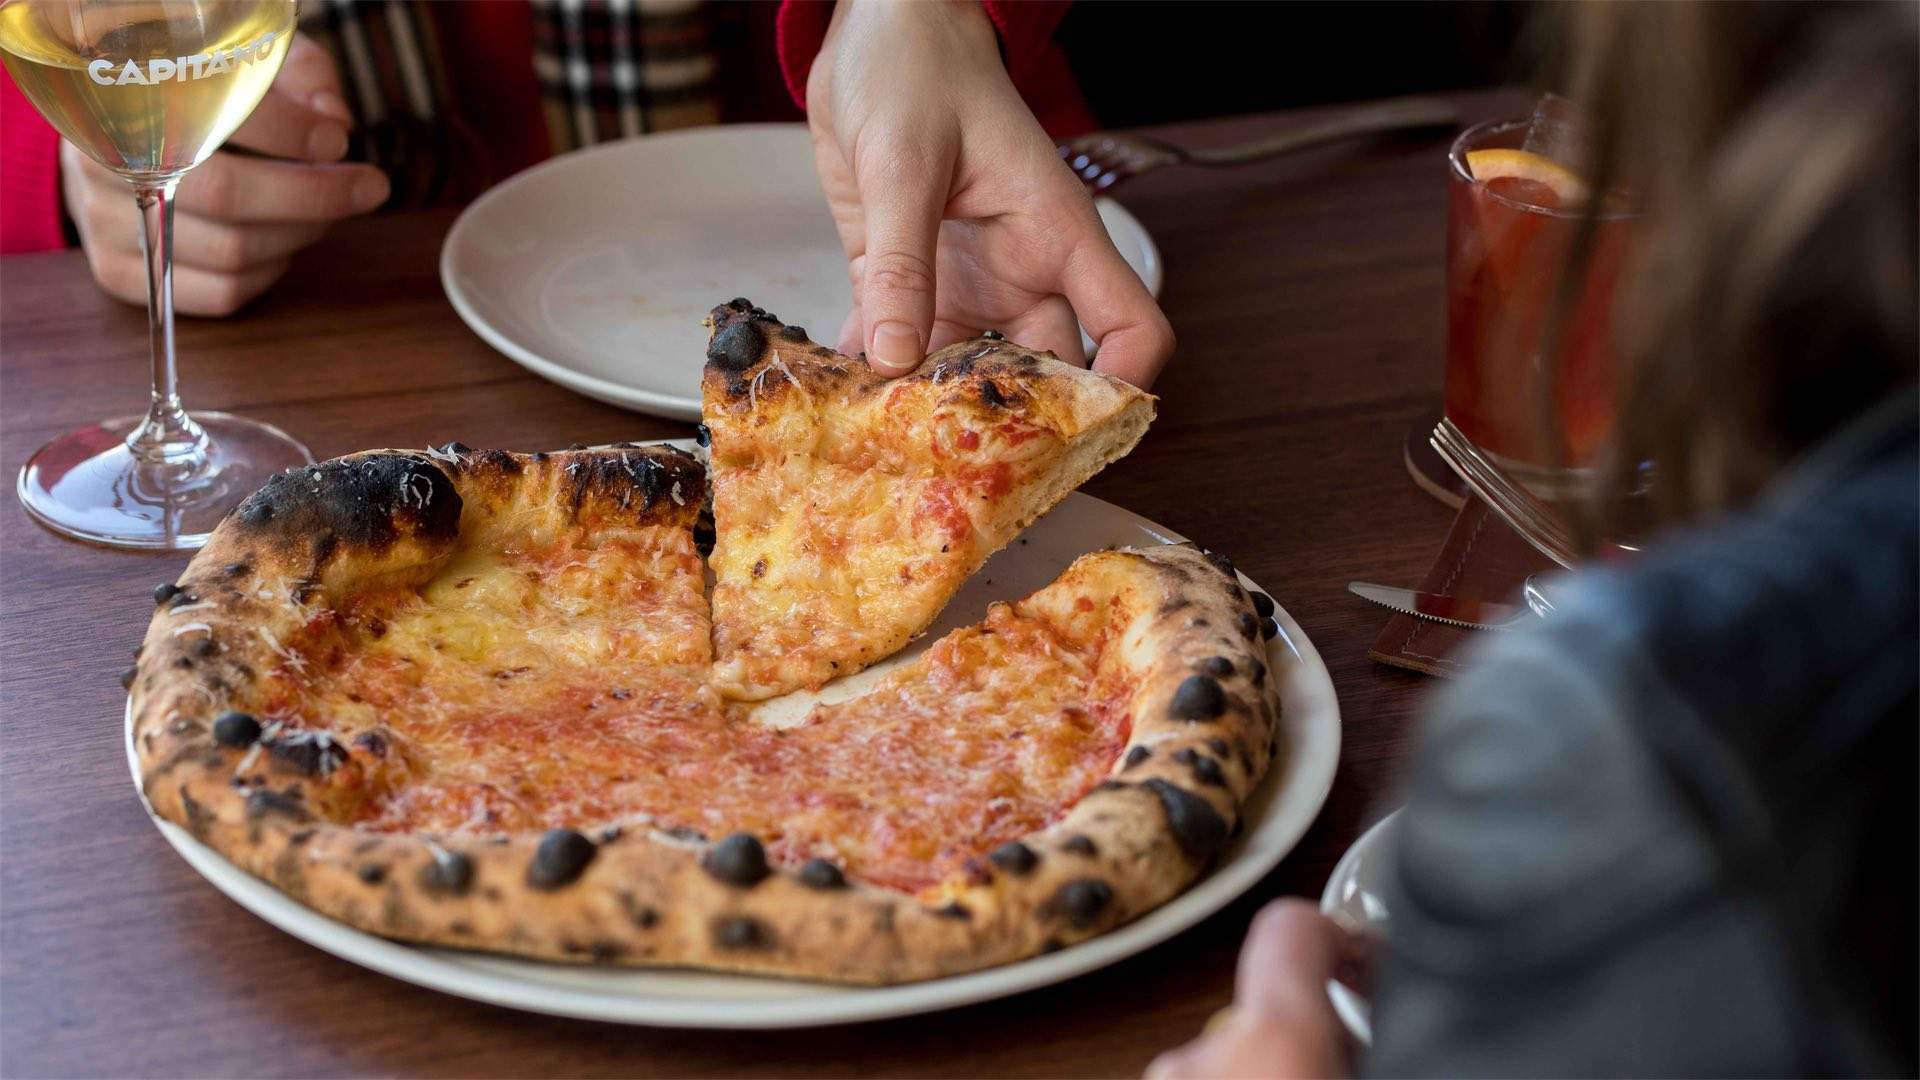 Capitano - home to some of the best pizza in Melbourne.